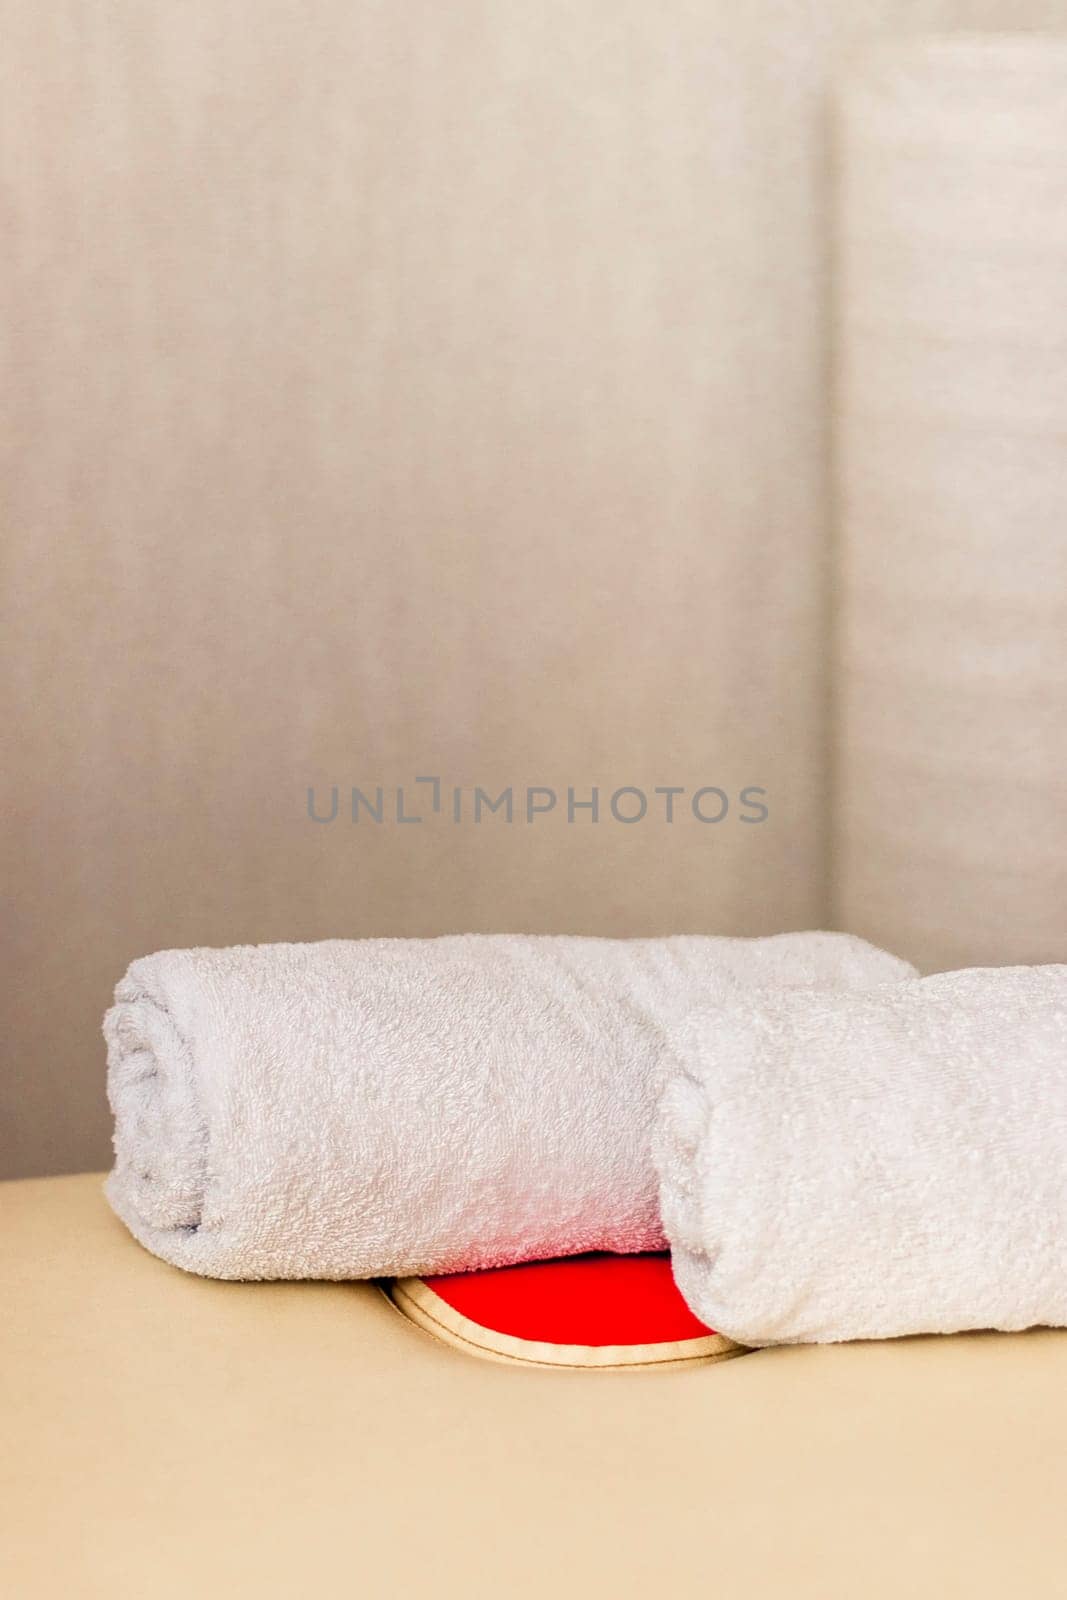 Close up shot of the white towels rolled in the massage couch